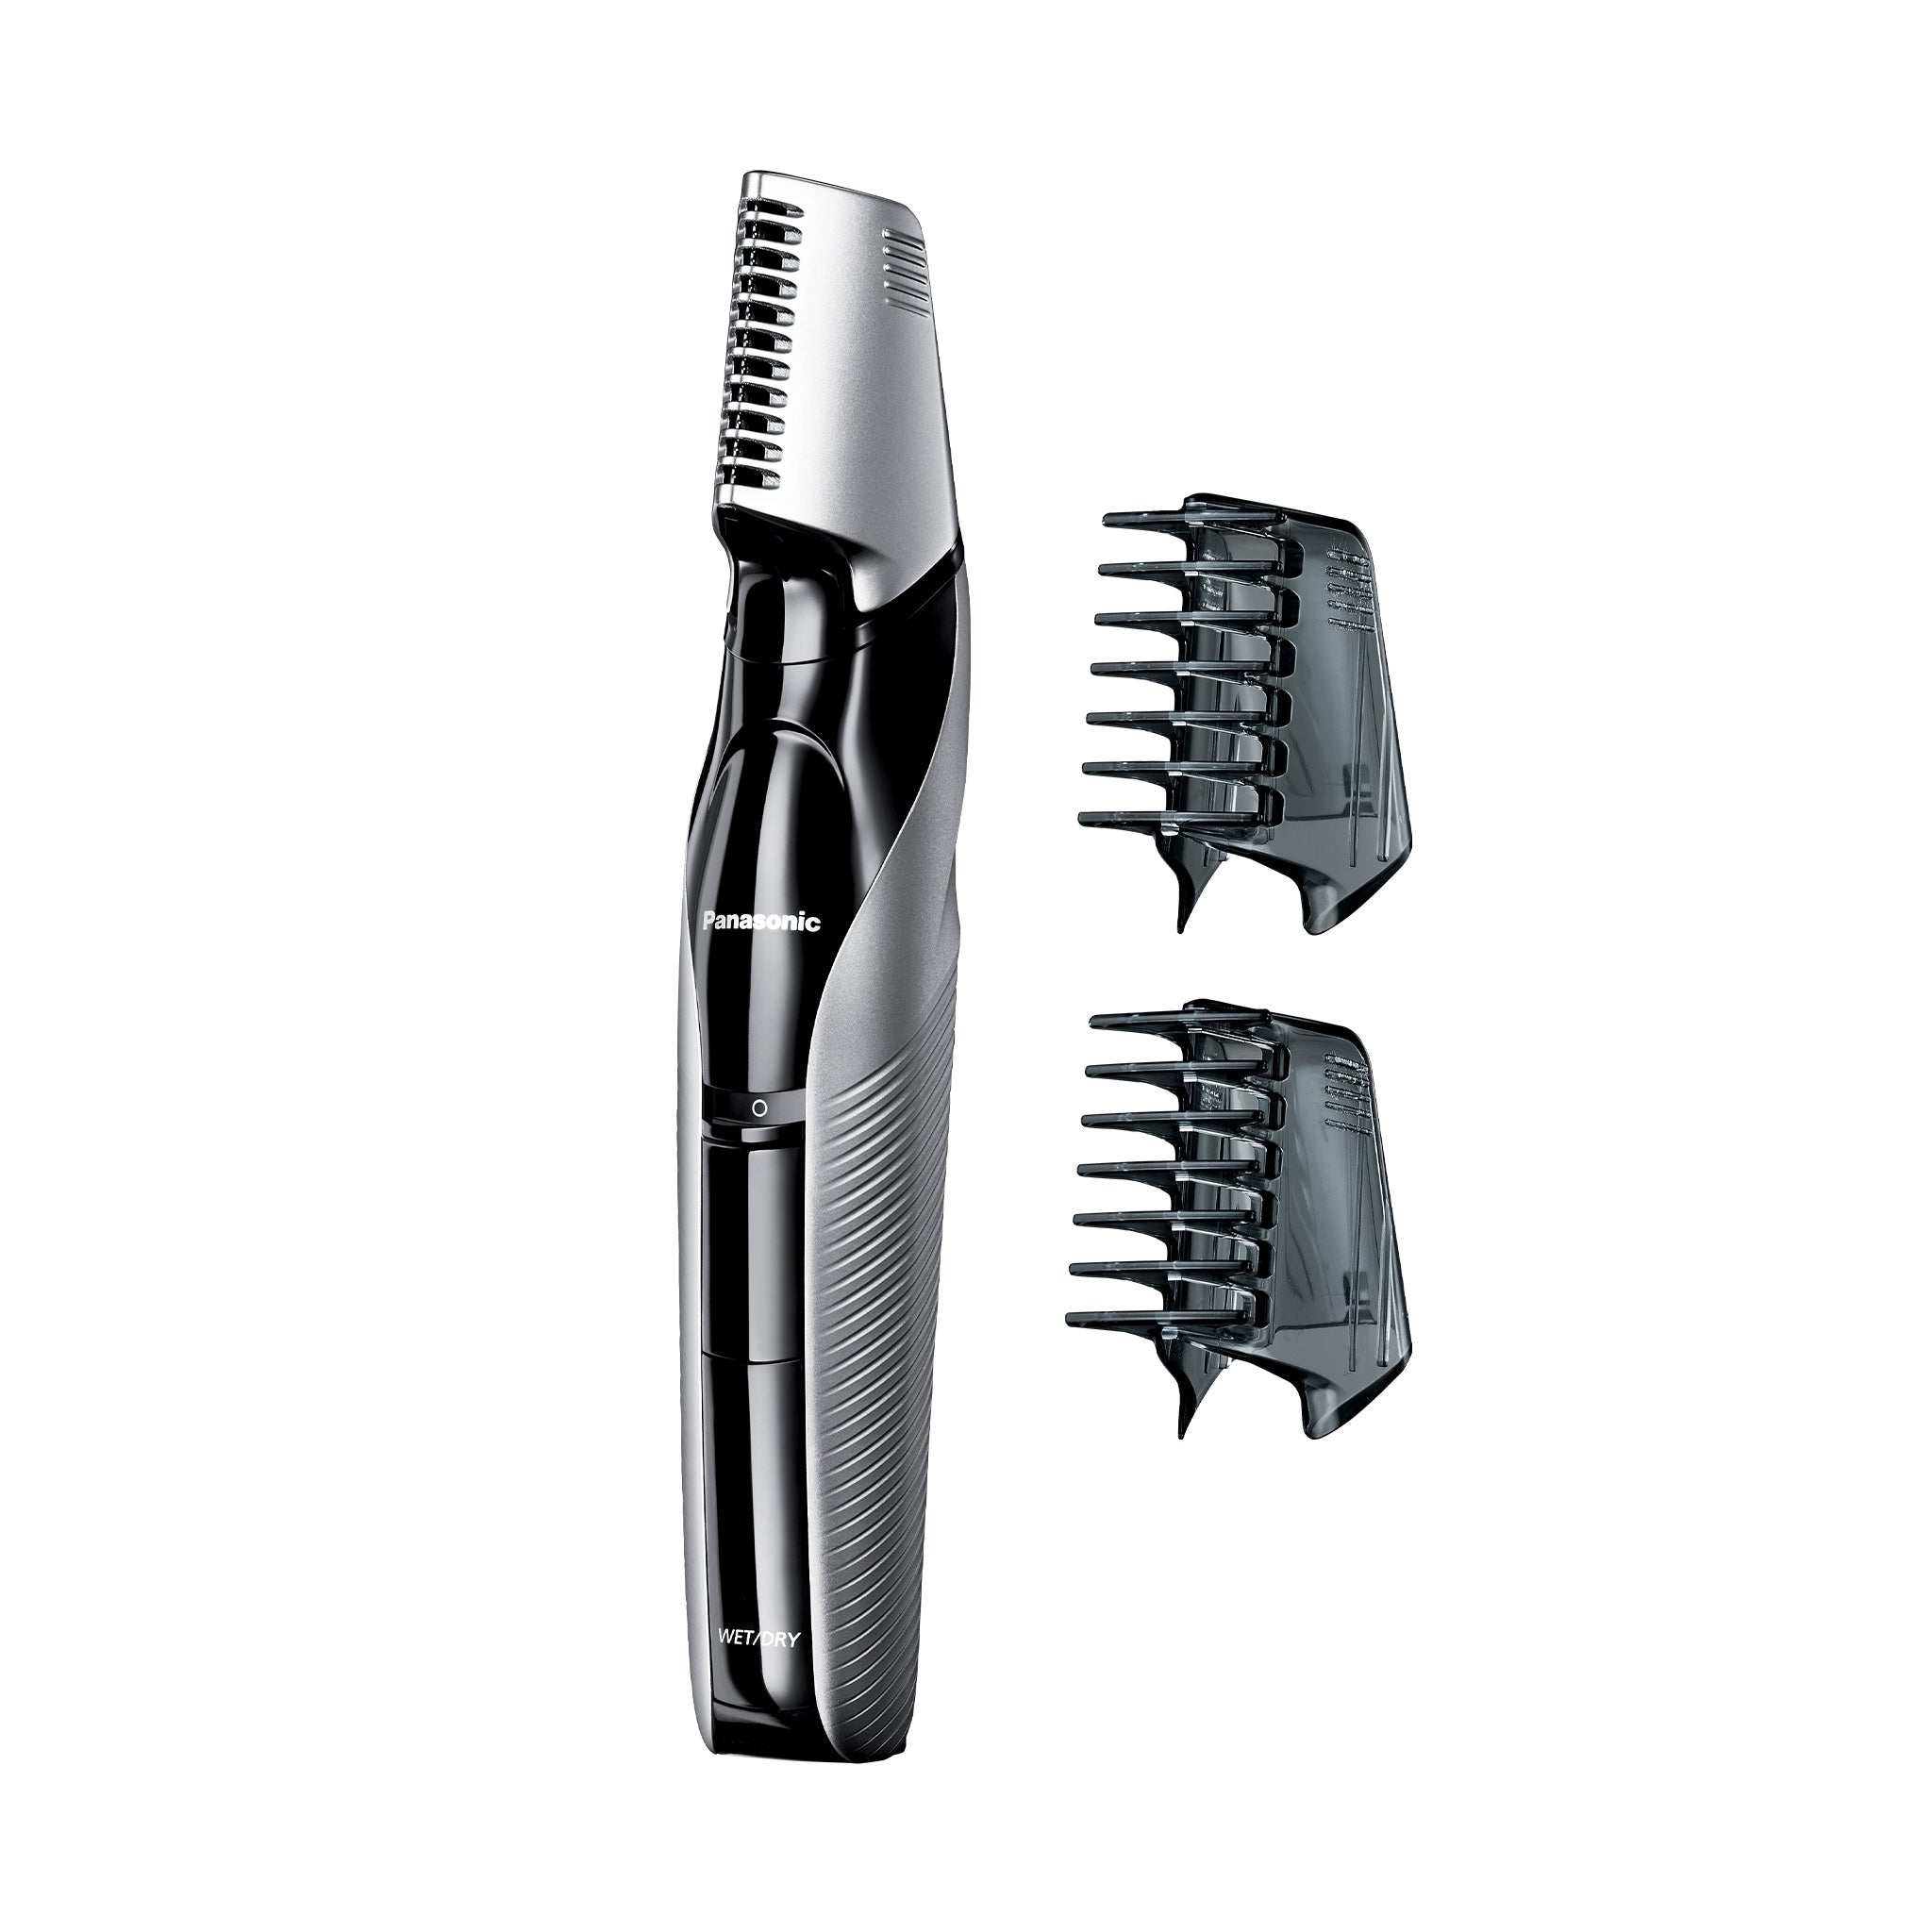 Panasonic Body Hair Groomer with 3 Comb Attachments - ER-GK60-S